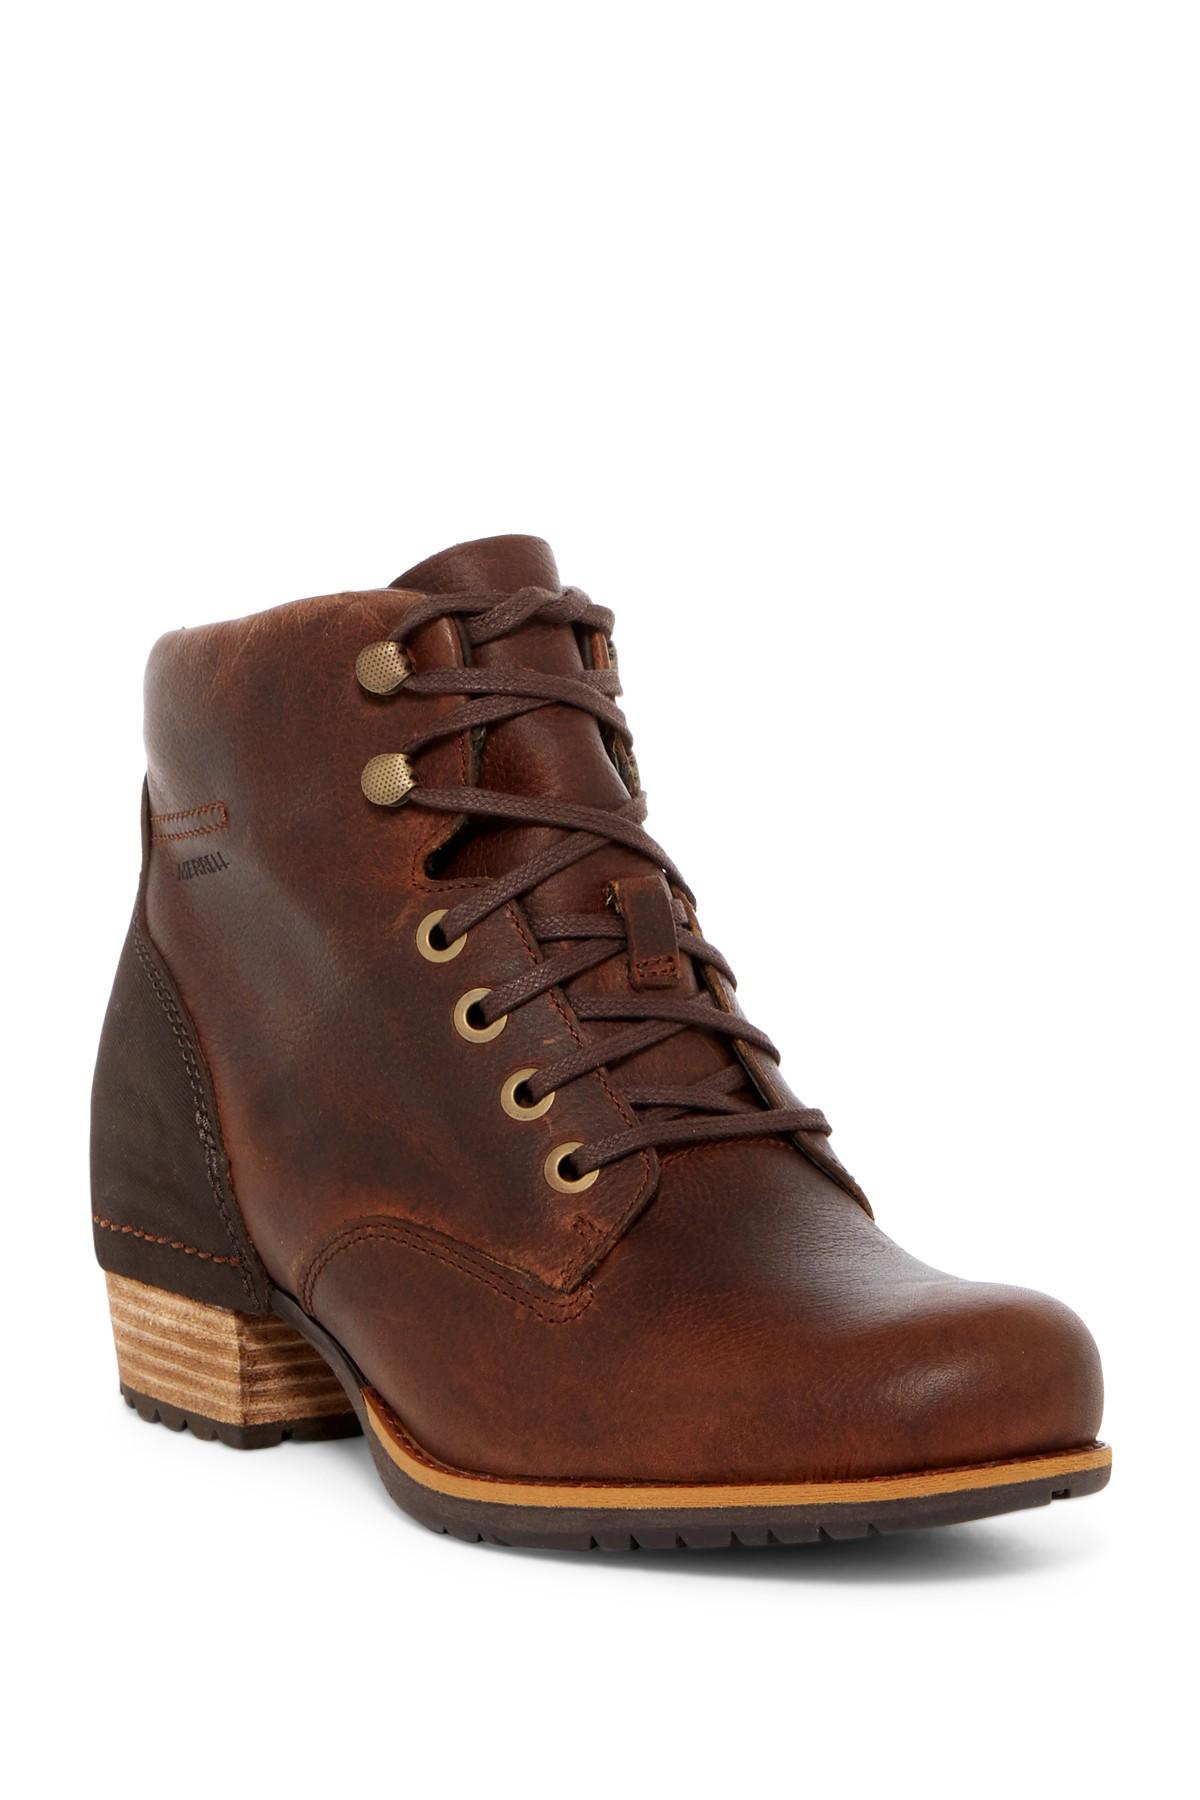 Merrell Leather Boot in Brown | Lyst